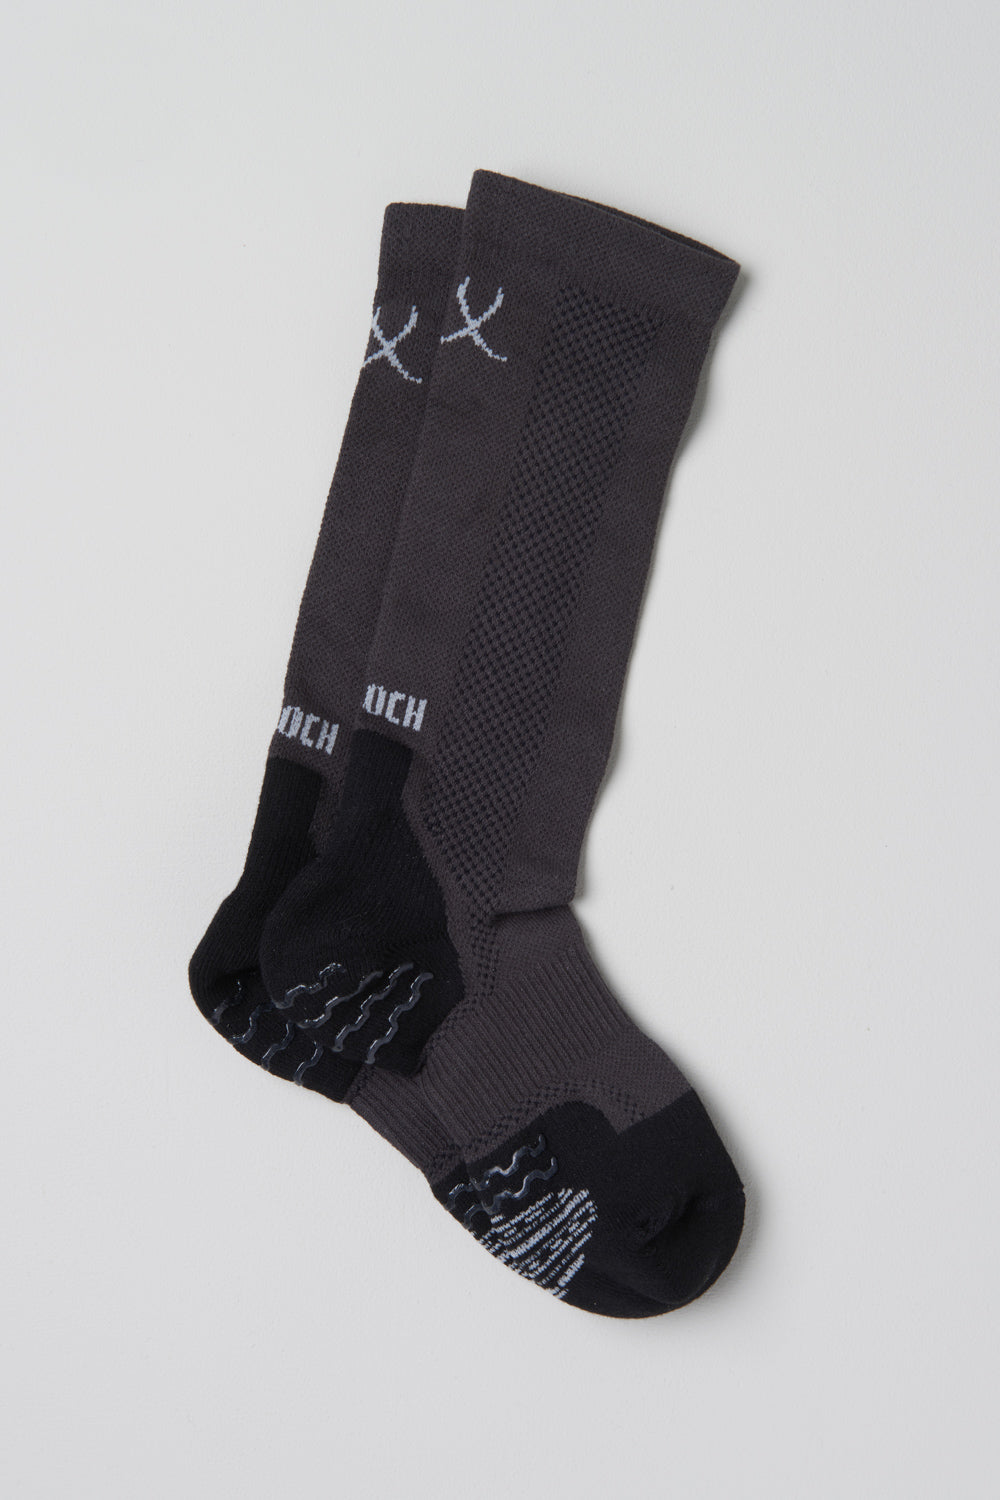 Bloch Sox Now In Stock! - Blogs by Dance and Fitness